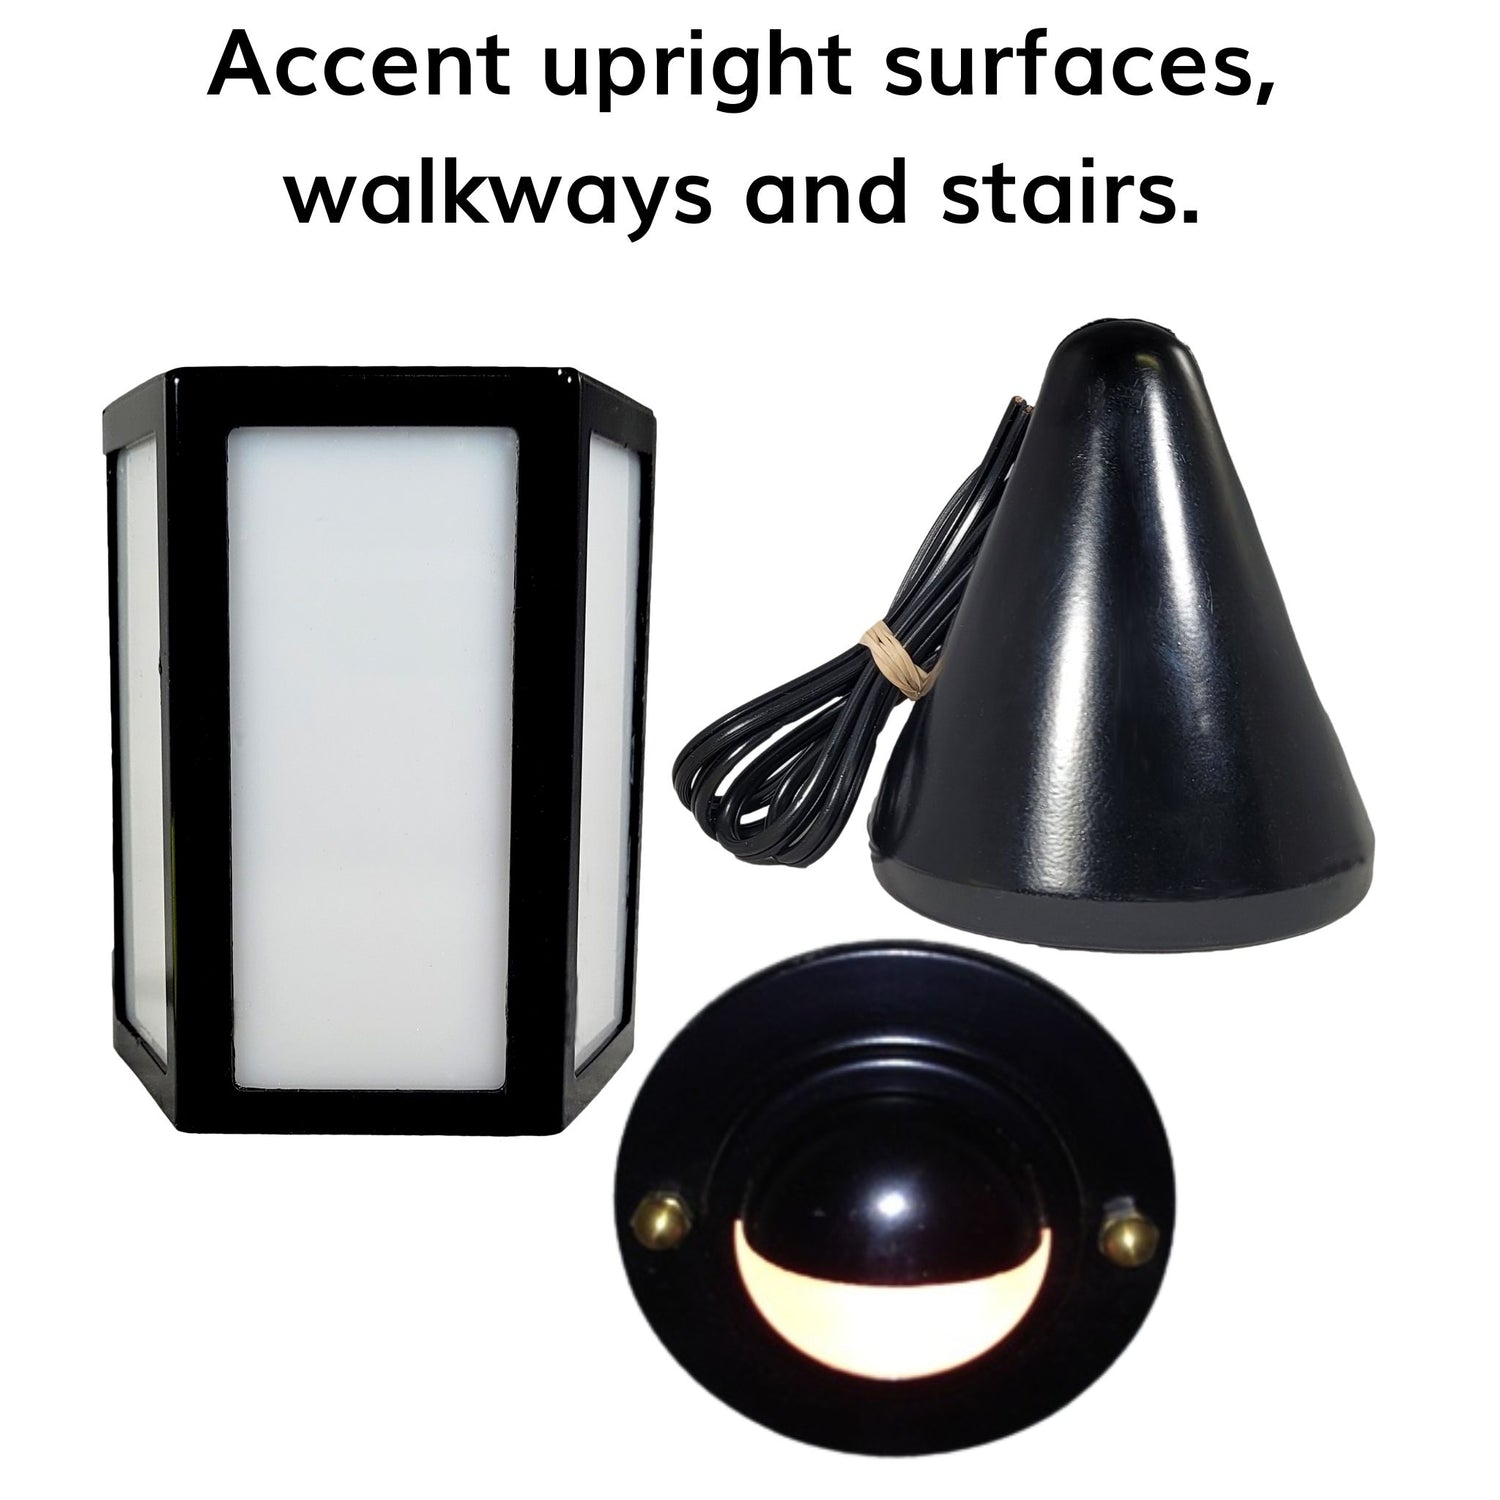 Accent upright surfaces, walkways and stairs with LED Deck Lights.